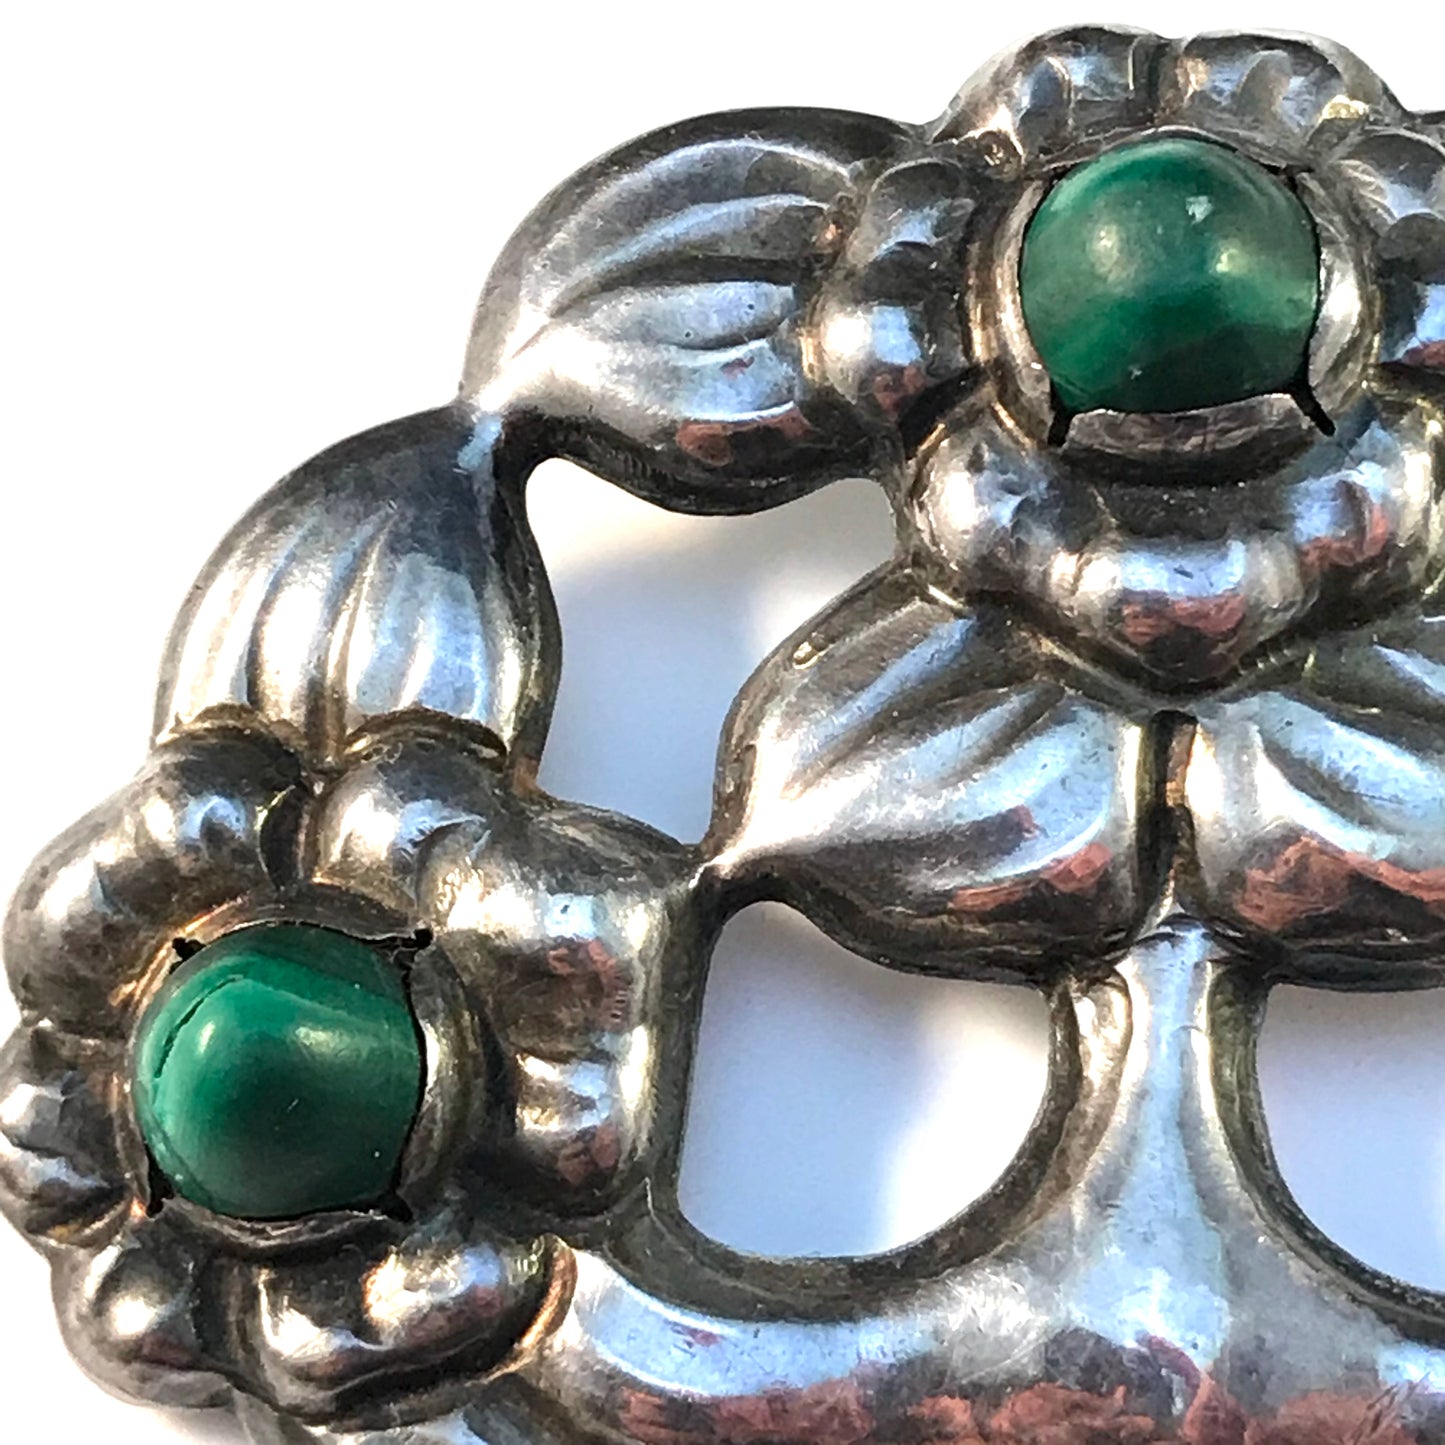 Evald Nielsen for SL Jacobsen & Co, Denmark 1910s Arts and Crafts 830 Silver Malachite Brooch